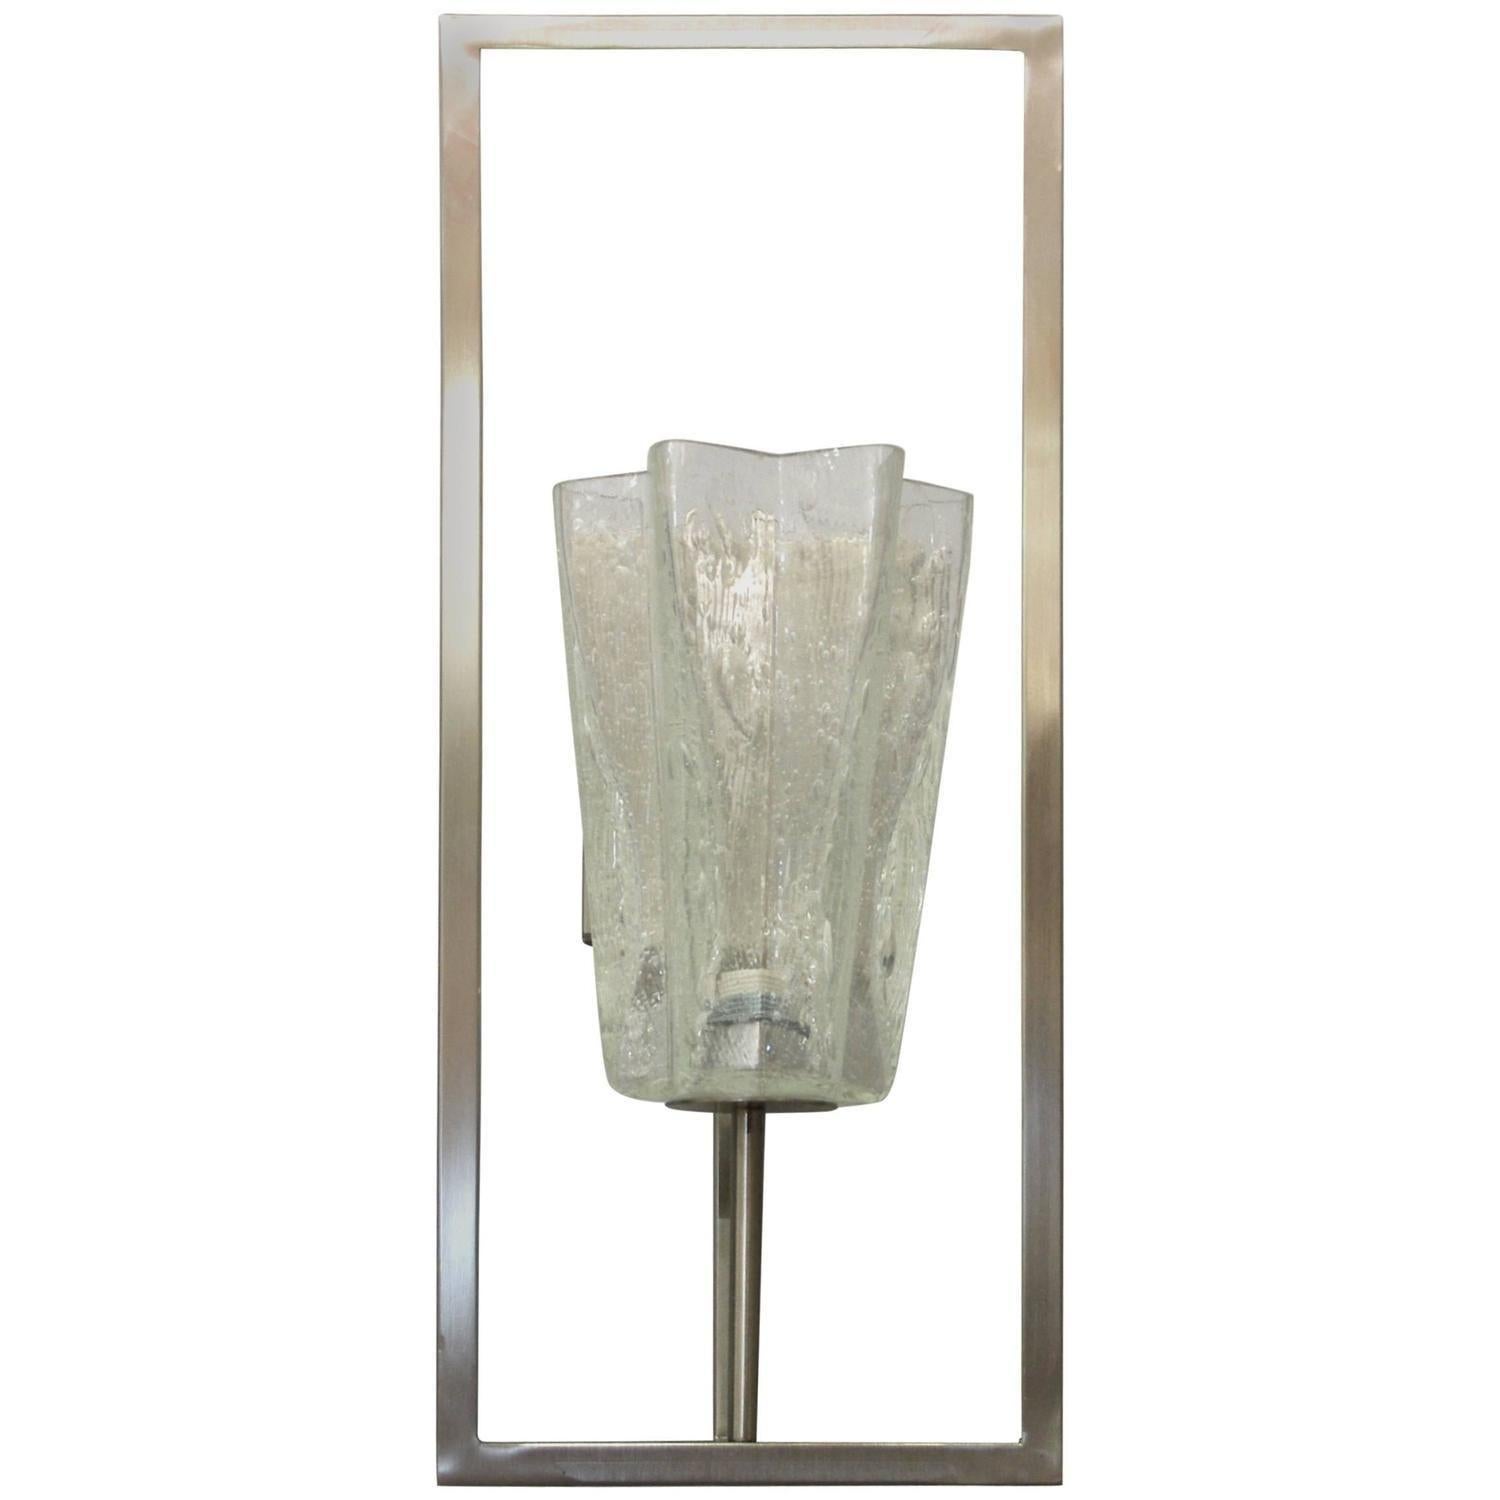 Set of Twelve Limited Edition Italian sconce with clear textured Murano glasses hand blown to the shape of a star and mounted on rectangular brushed nickel structures, made in Italy.